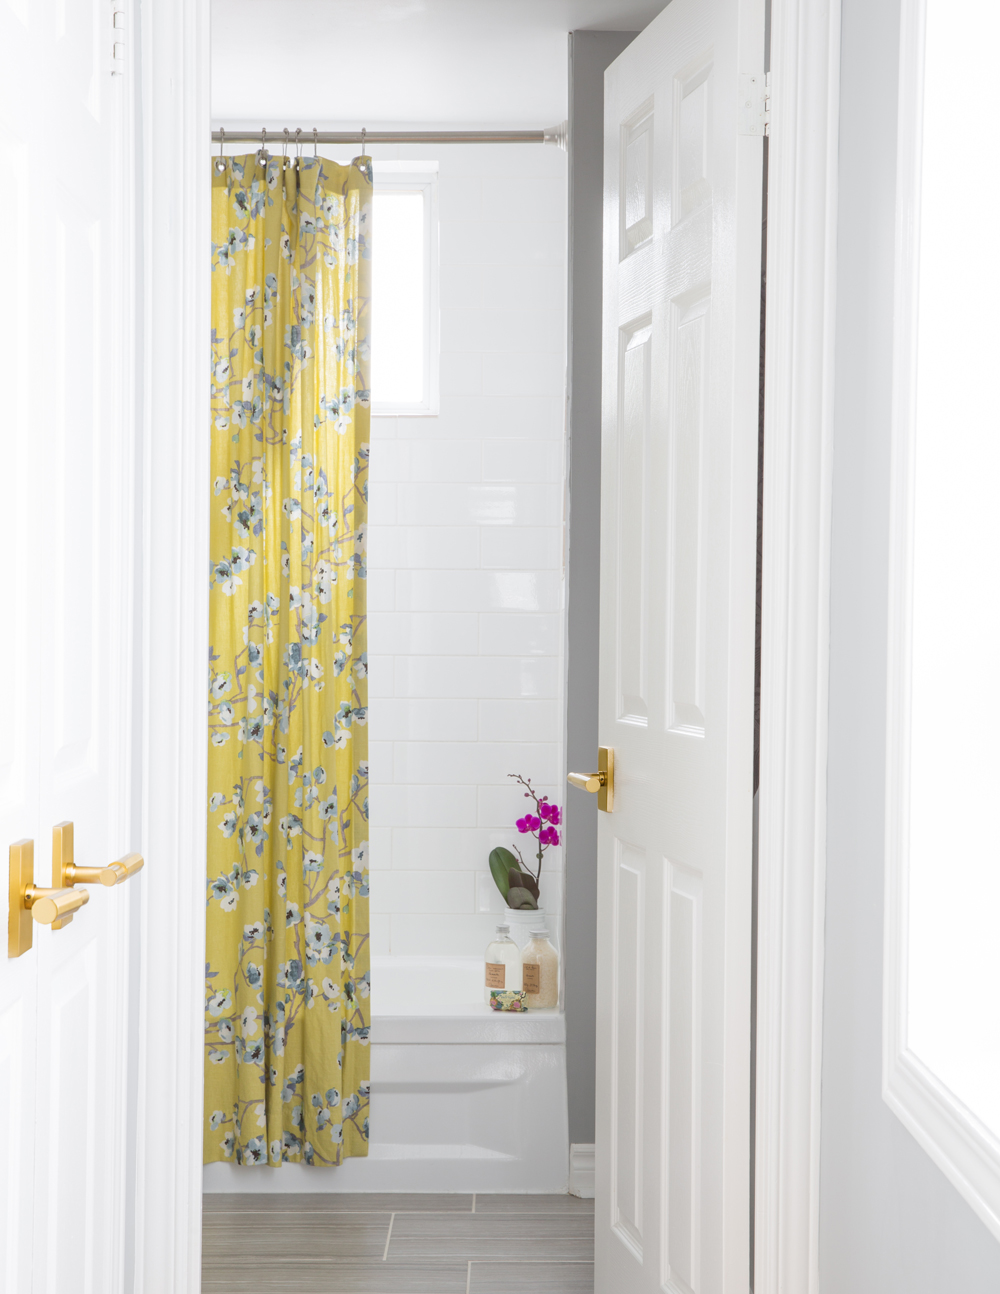 bathroom door open to yellow and white floral shower curtain